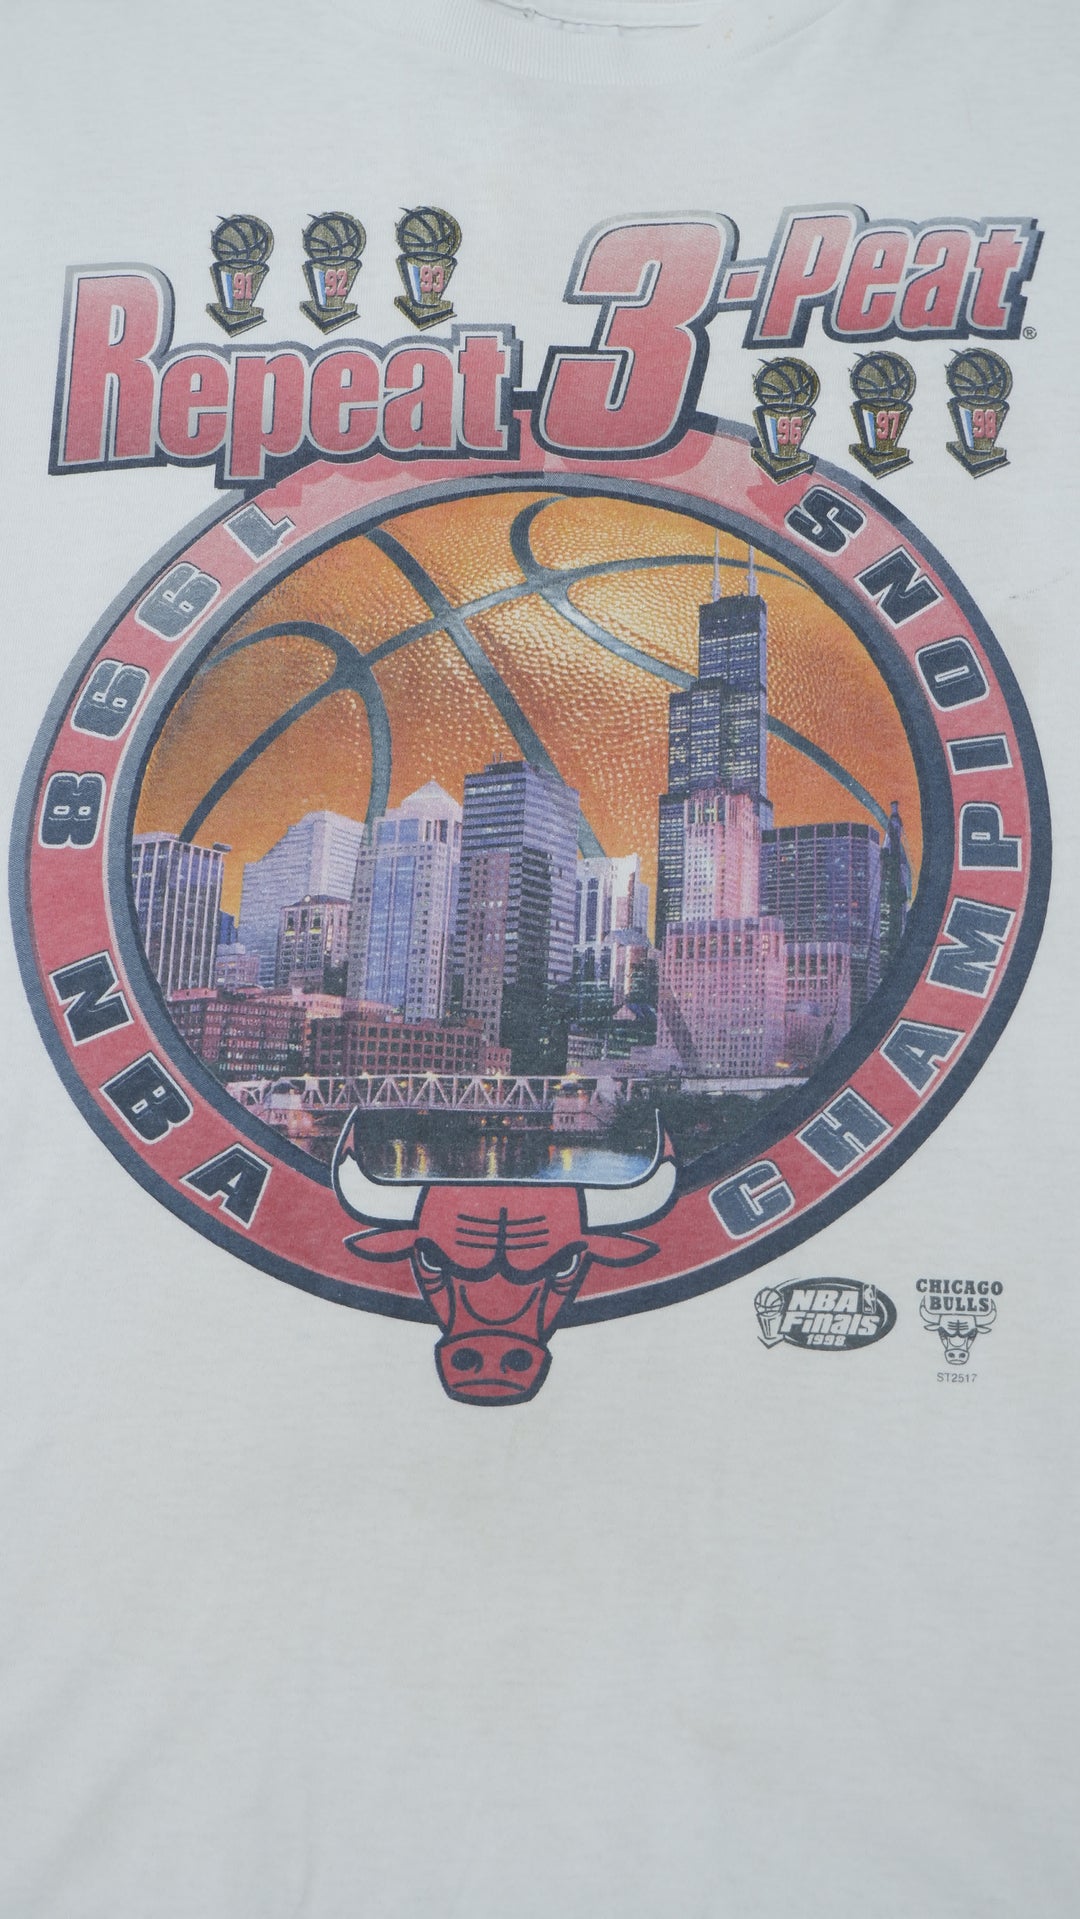 Vintage 98 Chicago Bulls NBA Champions Repeat 3-Peat Starter T-Shirt Made In USA